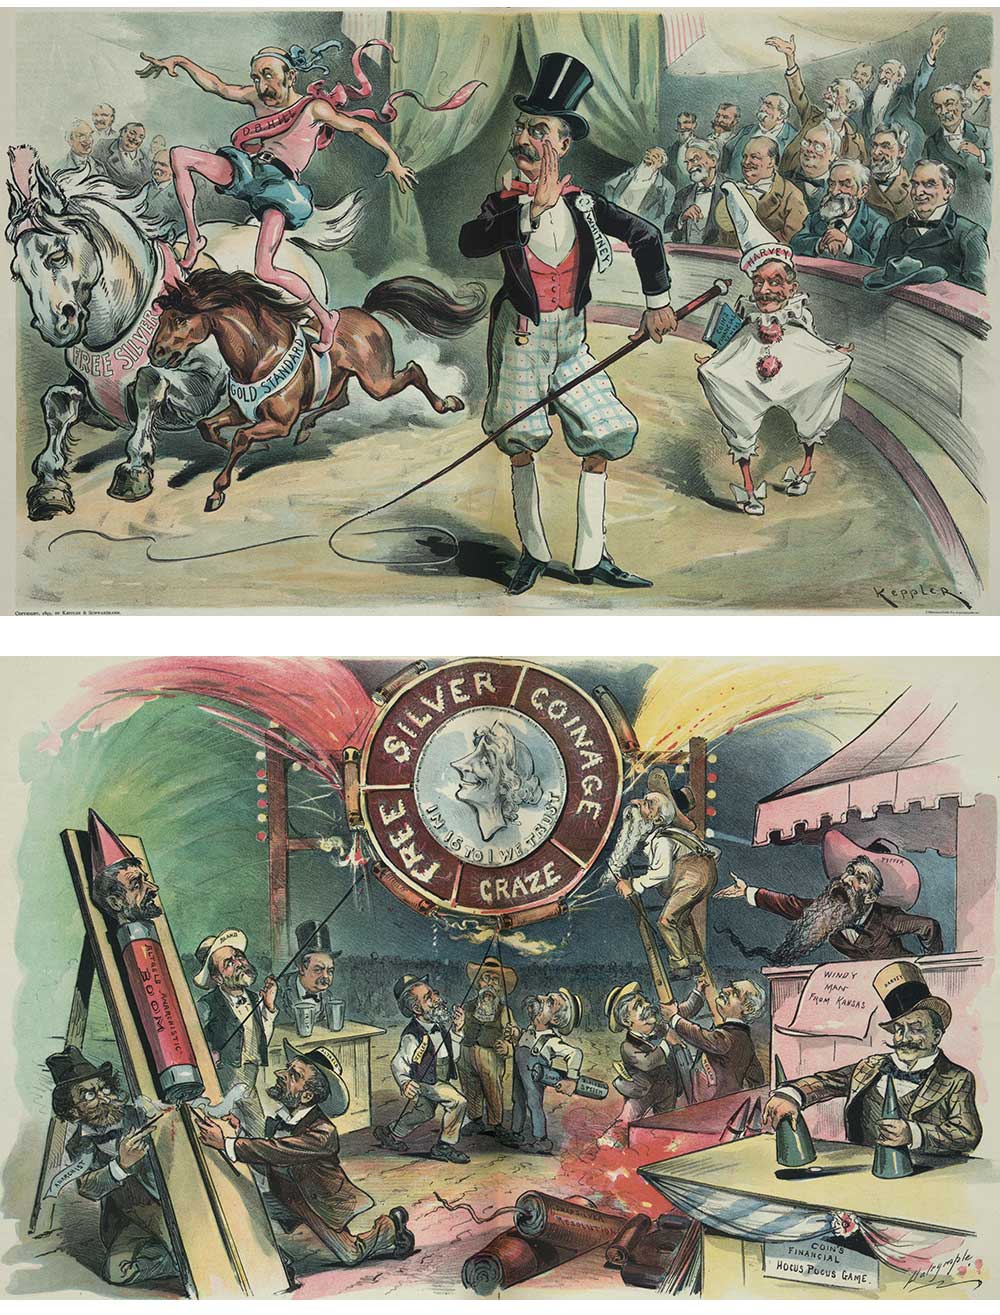 Top: The Circus Has Come!, by Udo J. Keppler, 1895. Bottom: Fizz! Boom!! Ah!!!, by Louis Dalrymple, 1895.